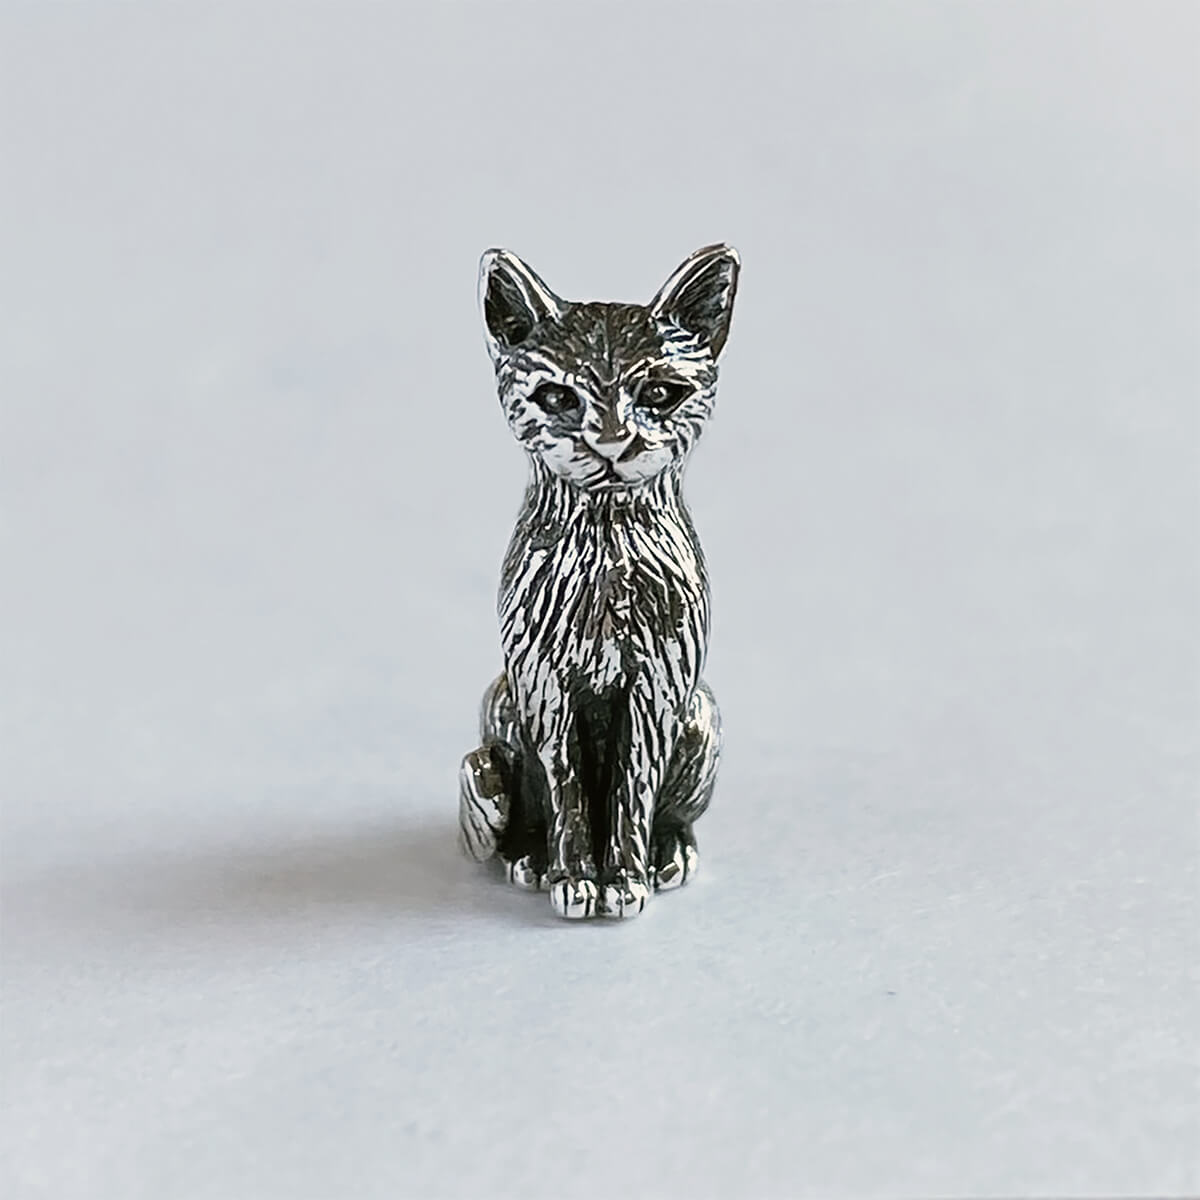 Finely detailed Sterling silver sitting cat charm